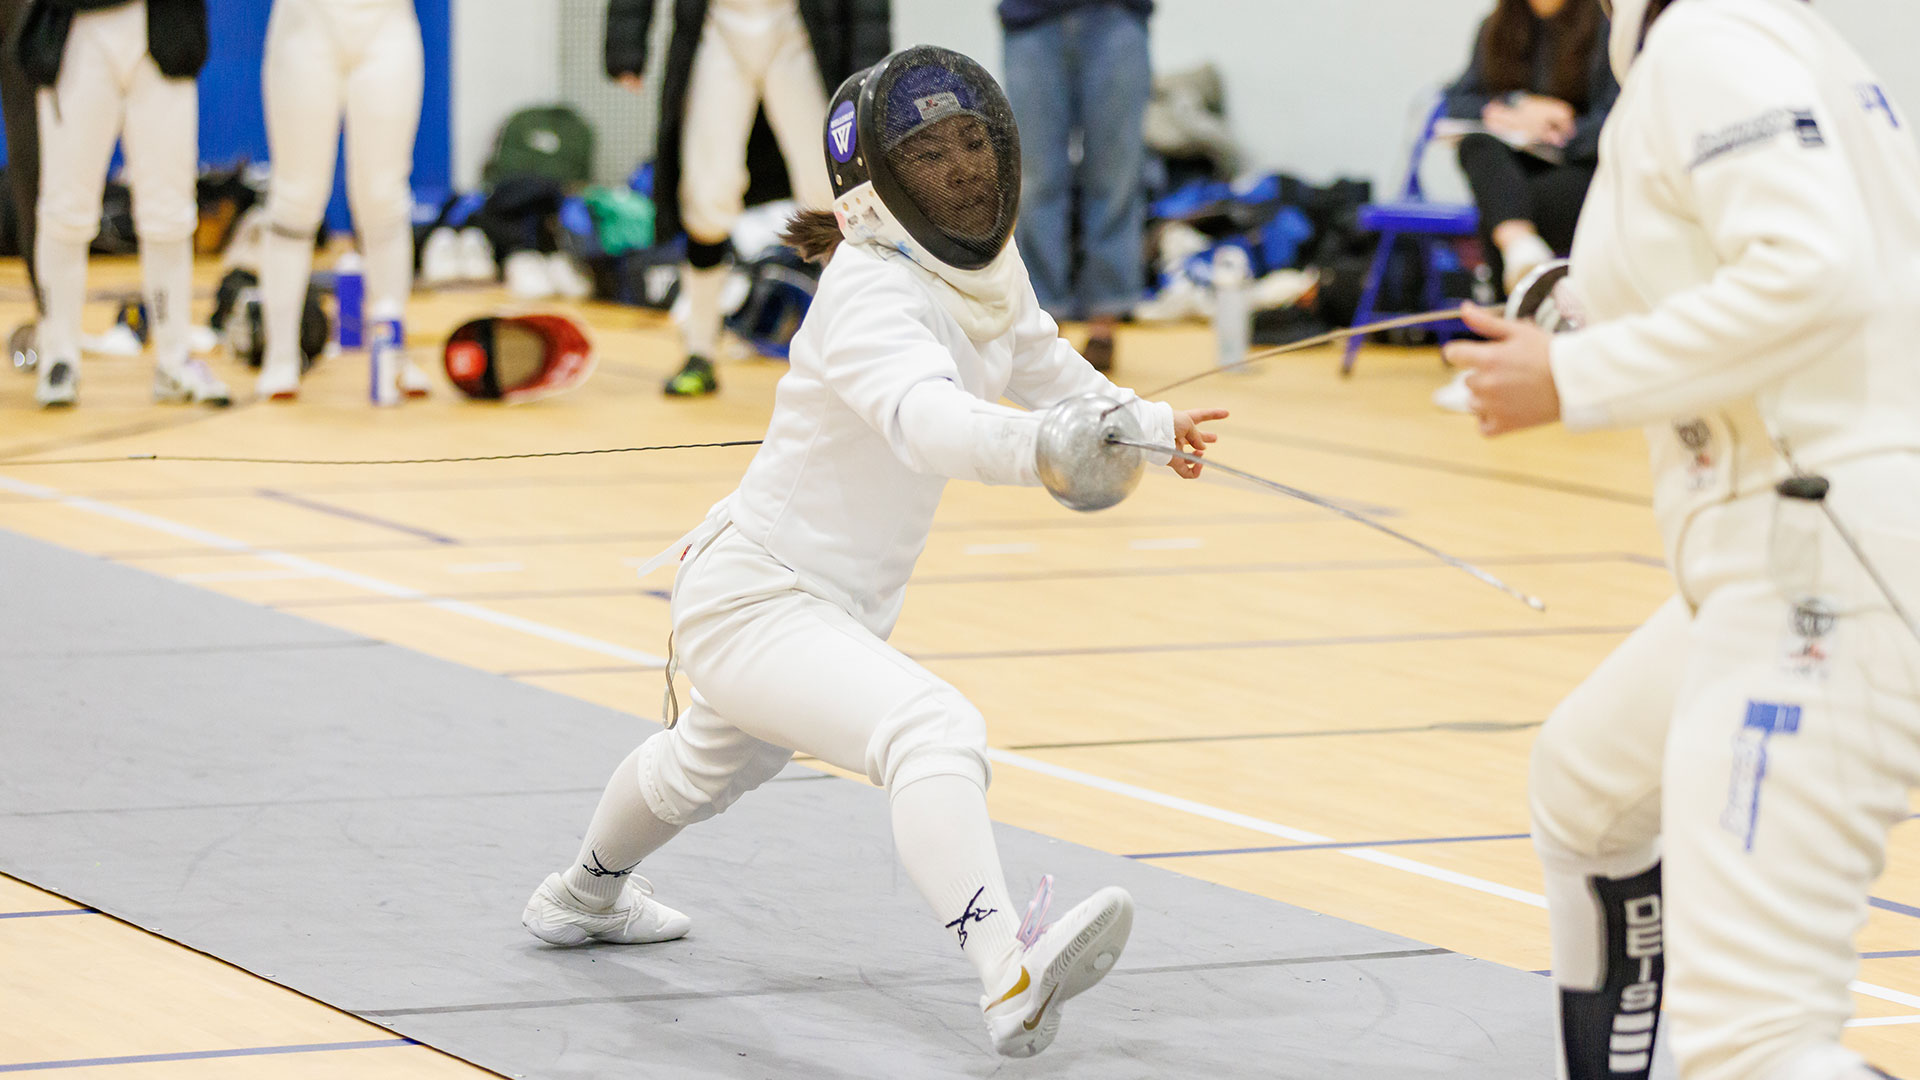 Sharon Huang '26 and Wellesley College fencing open the season at the Shark Tank Challenge on October 22 (Frank Poulin)